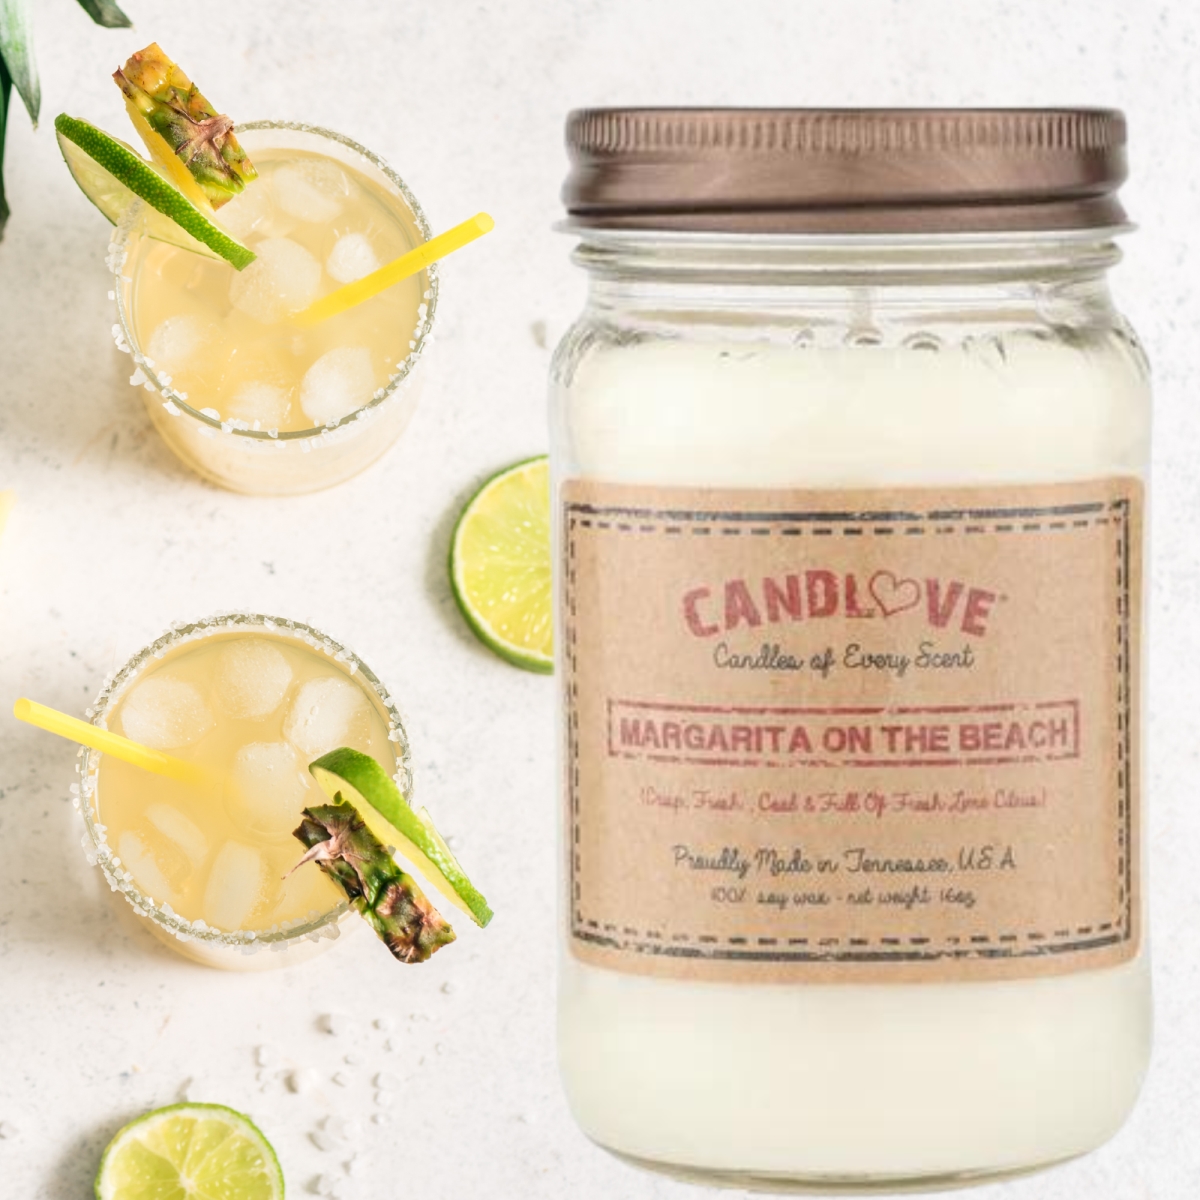 Picture of PPI SUPPLIES Margarita-C Candlove Margarita On The Beach Scented Candle - Non-Toxic 100% Soy Candle - Handmade & Hand Poured Long Burning Candle - Highly Scented All Natural Clean Burning Candle (16 OZ Mason Jar) Made in The USA